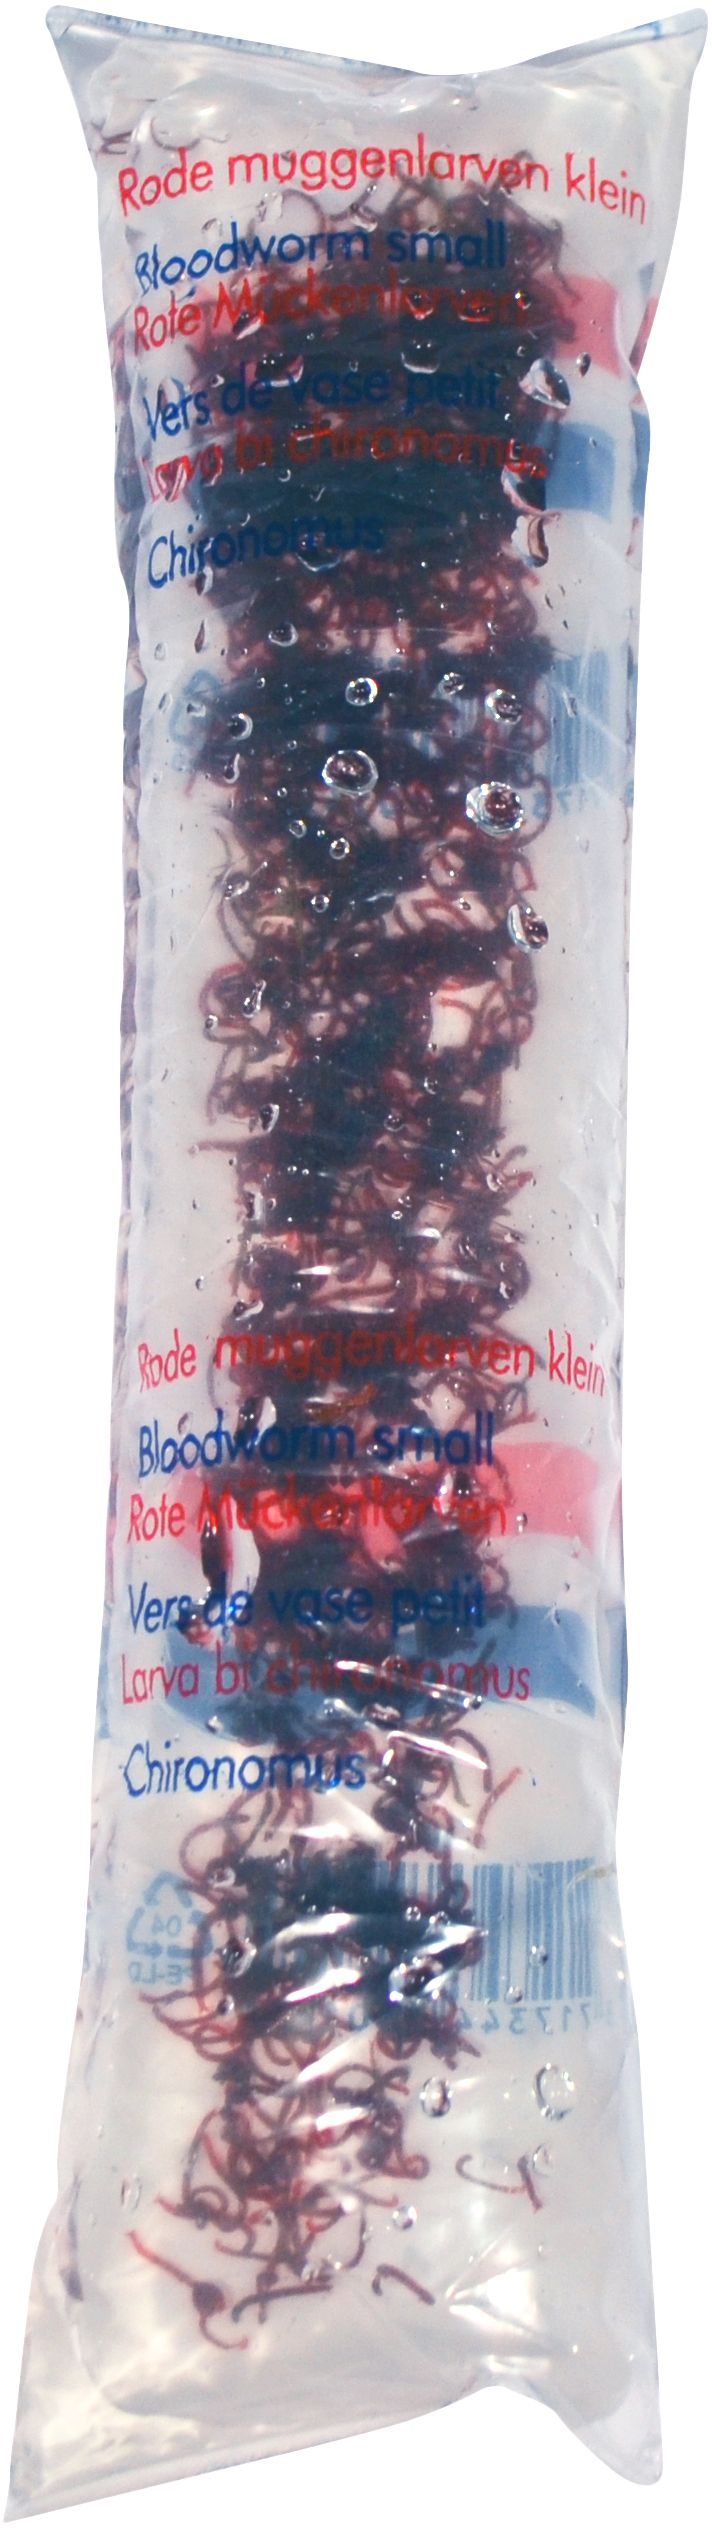 AQUADIP Red mosquito “Bloodworm” Small